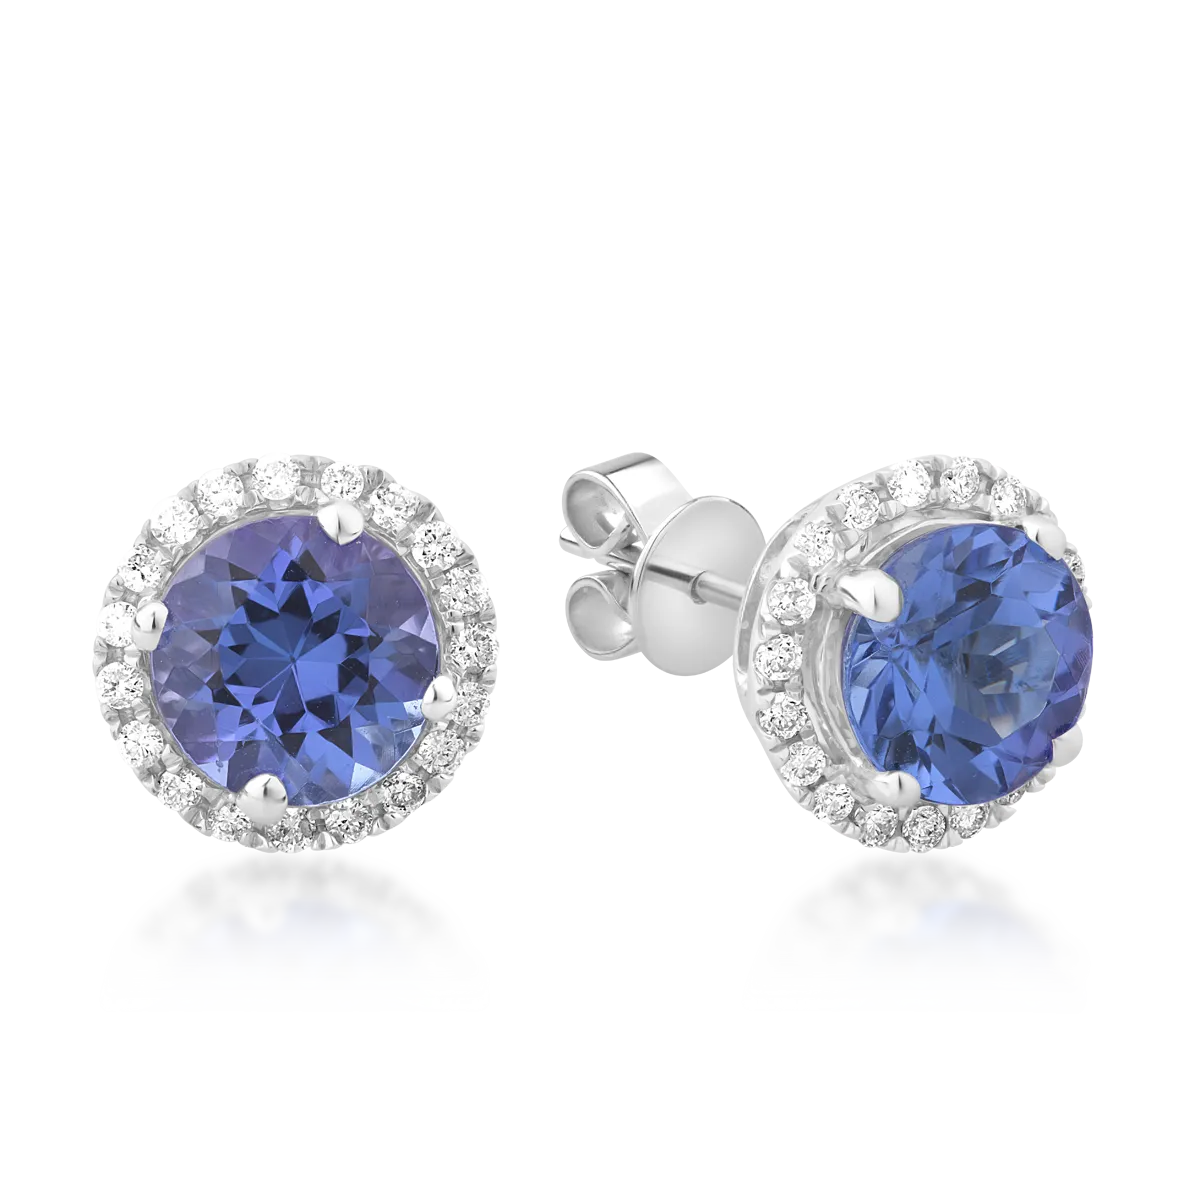 18K white gold earrings with 2.27ct tanzanite and 0.18ct diamonds